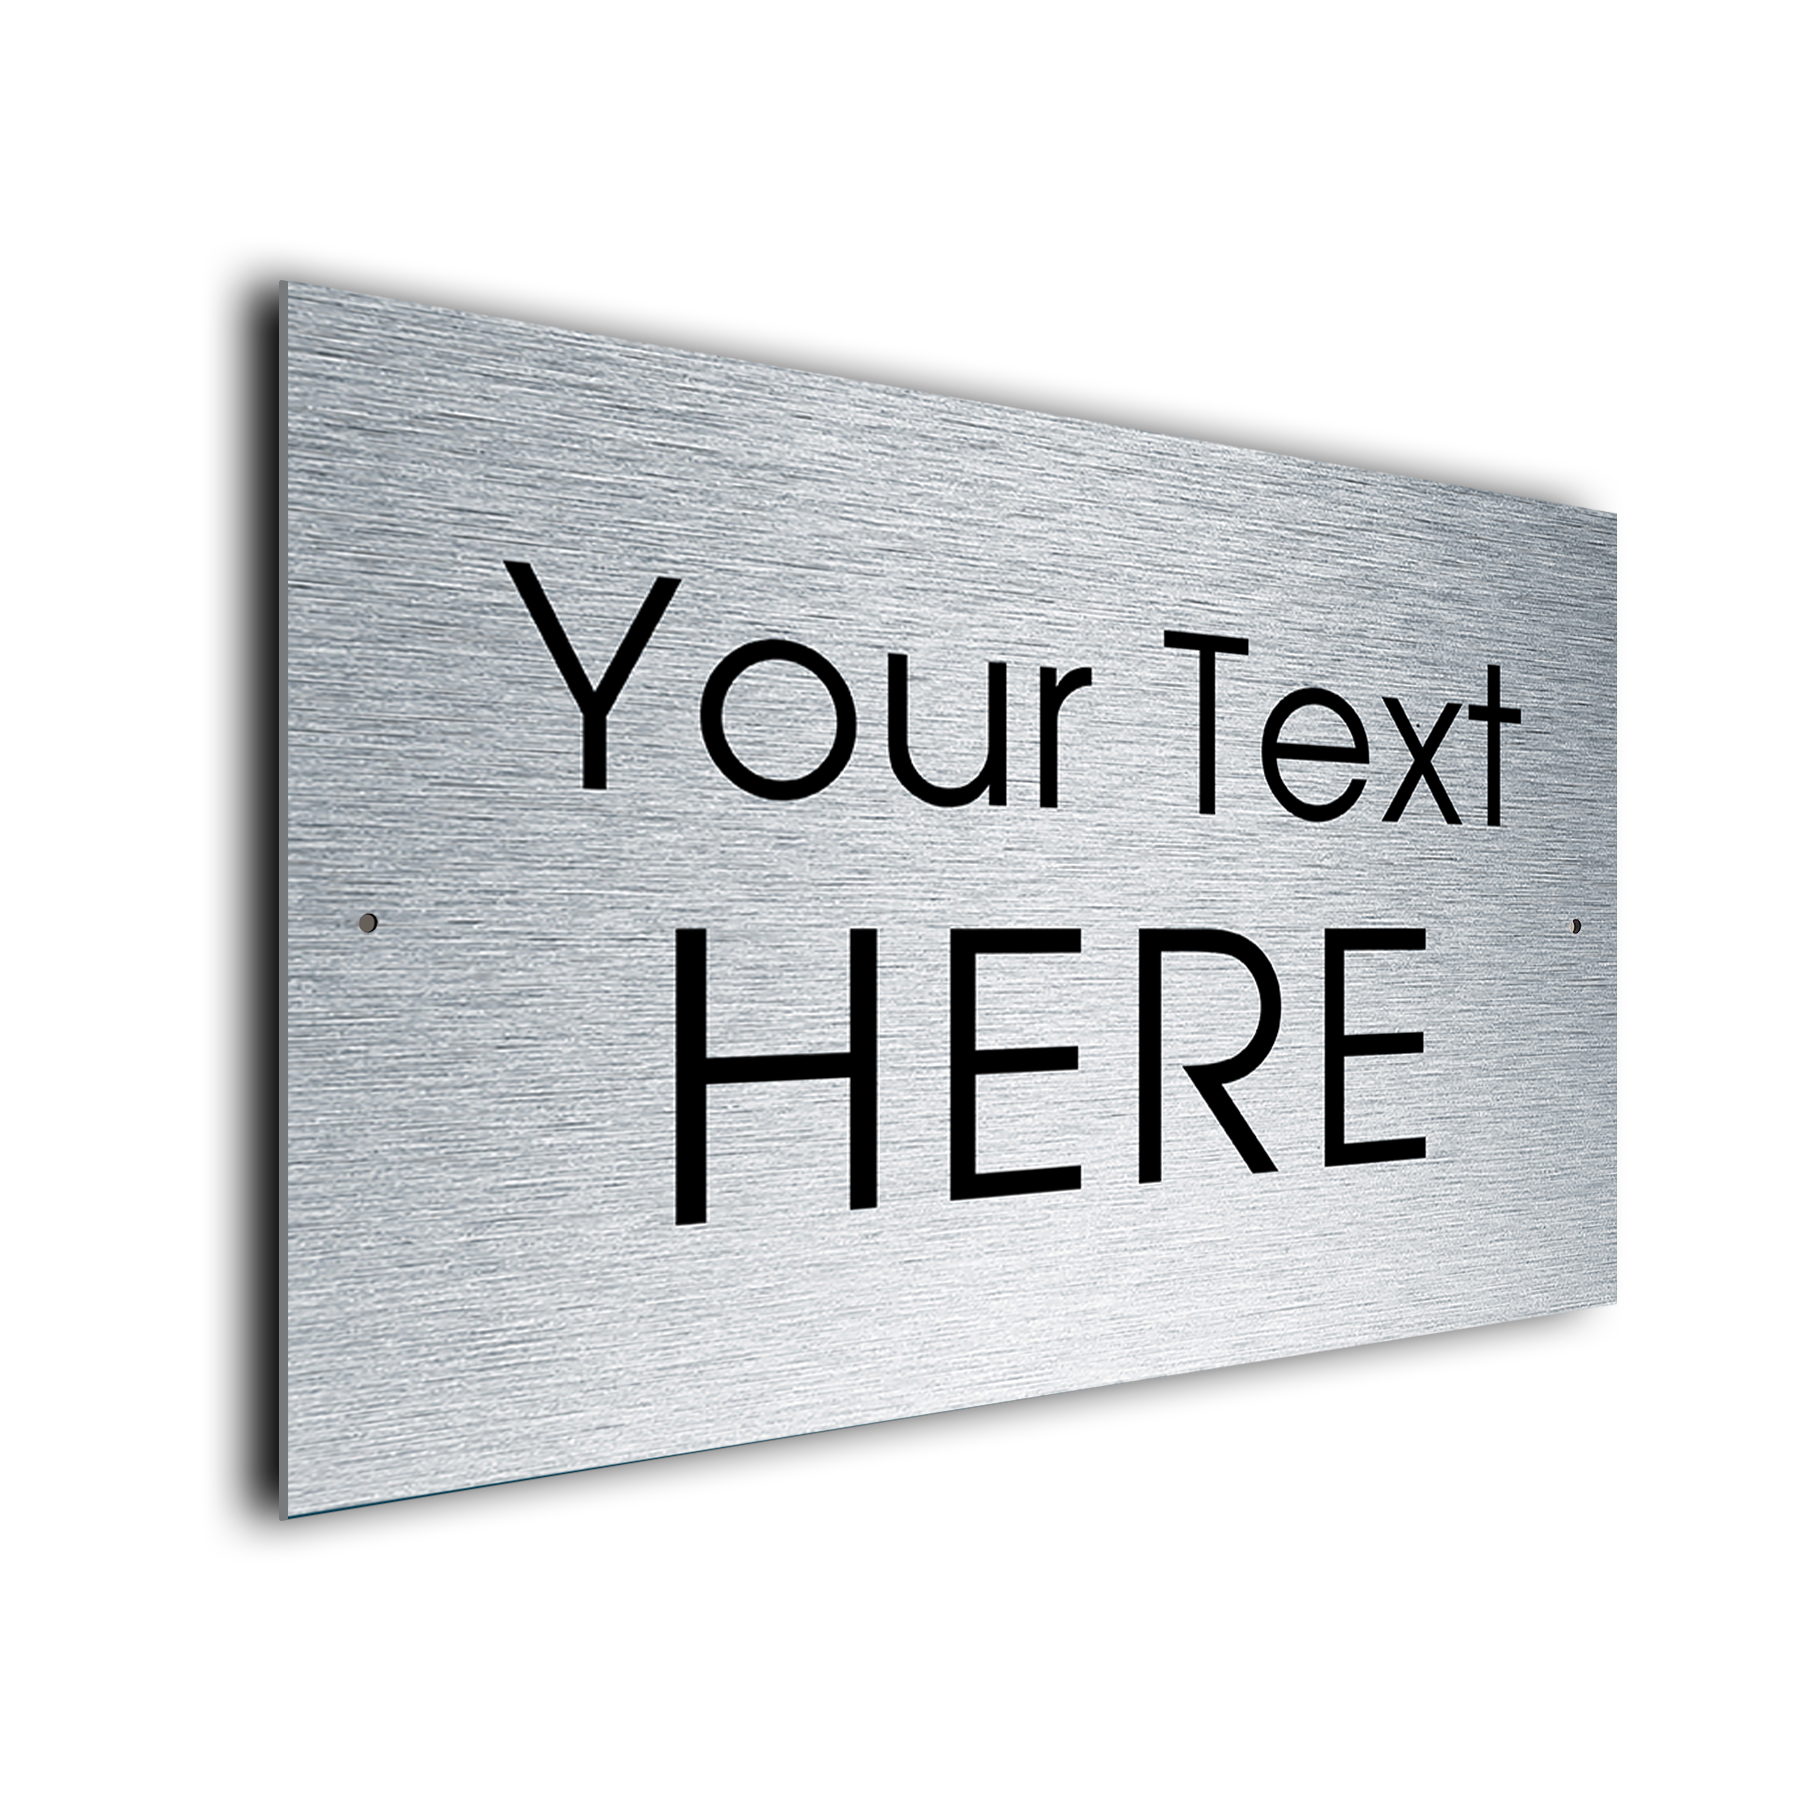 Your Text Here Sign